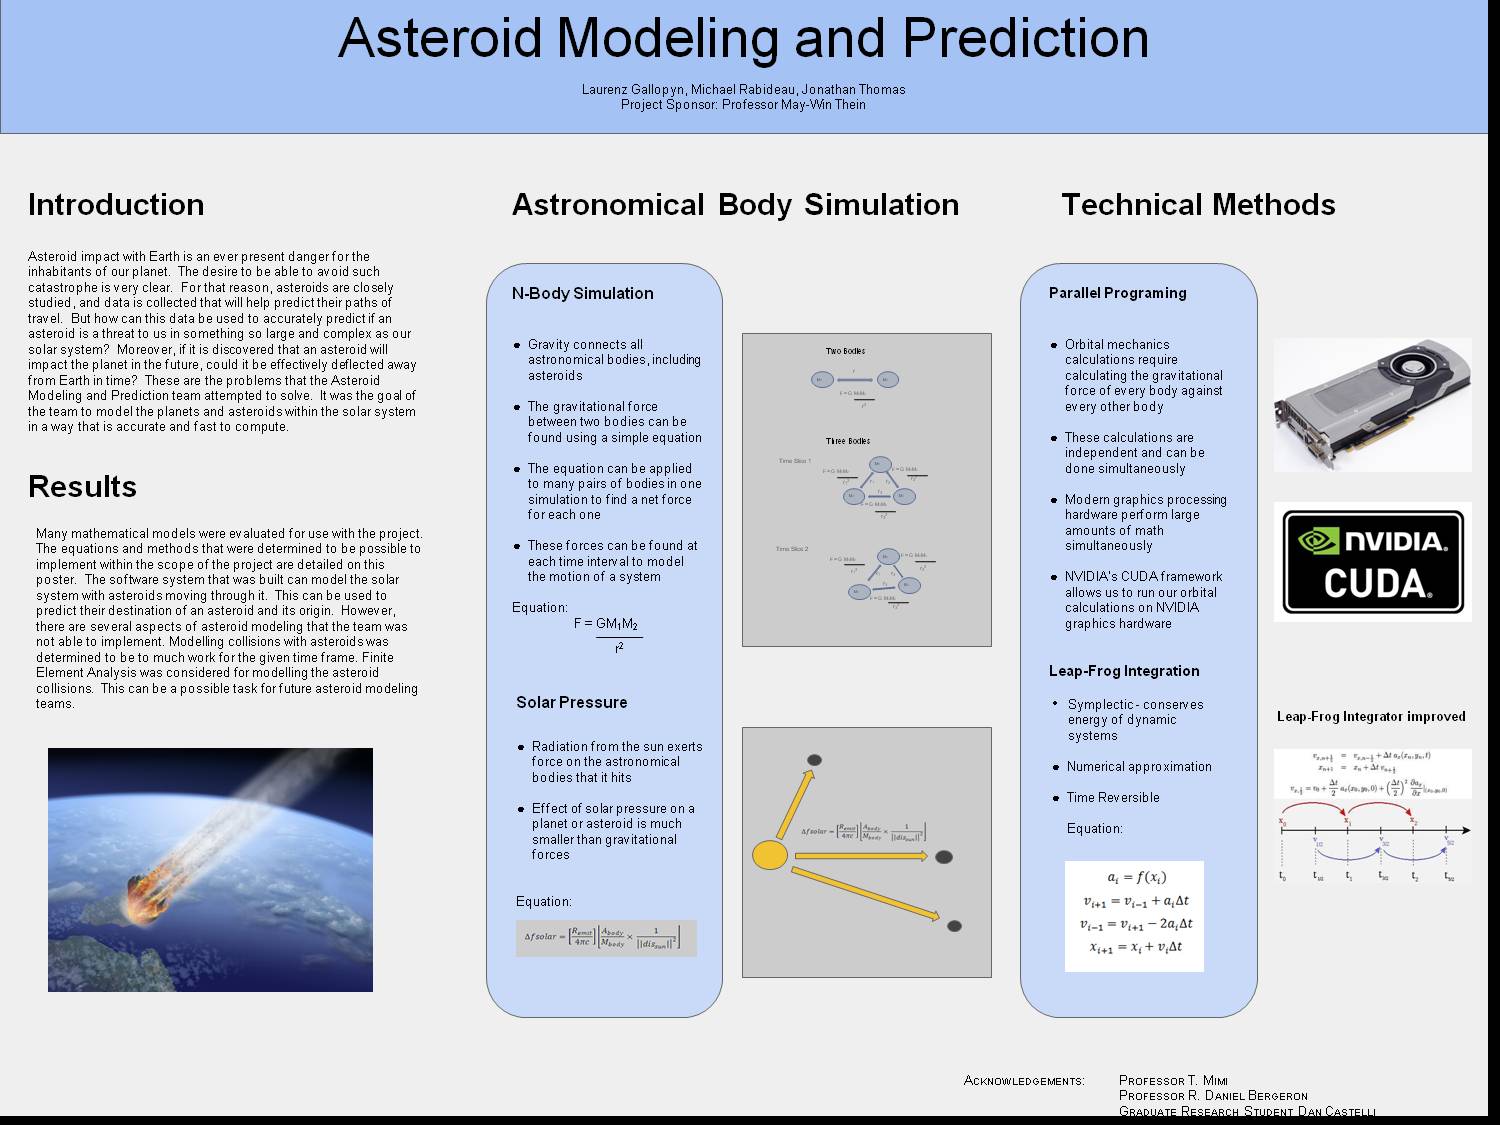 Asteroid Modeling And Prediction by MichaelRabideau